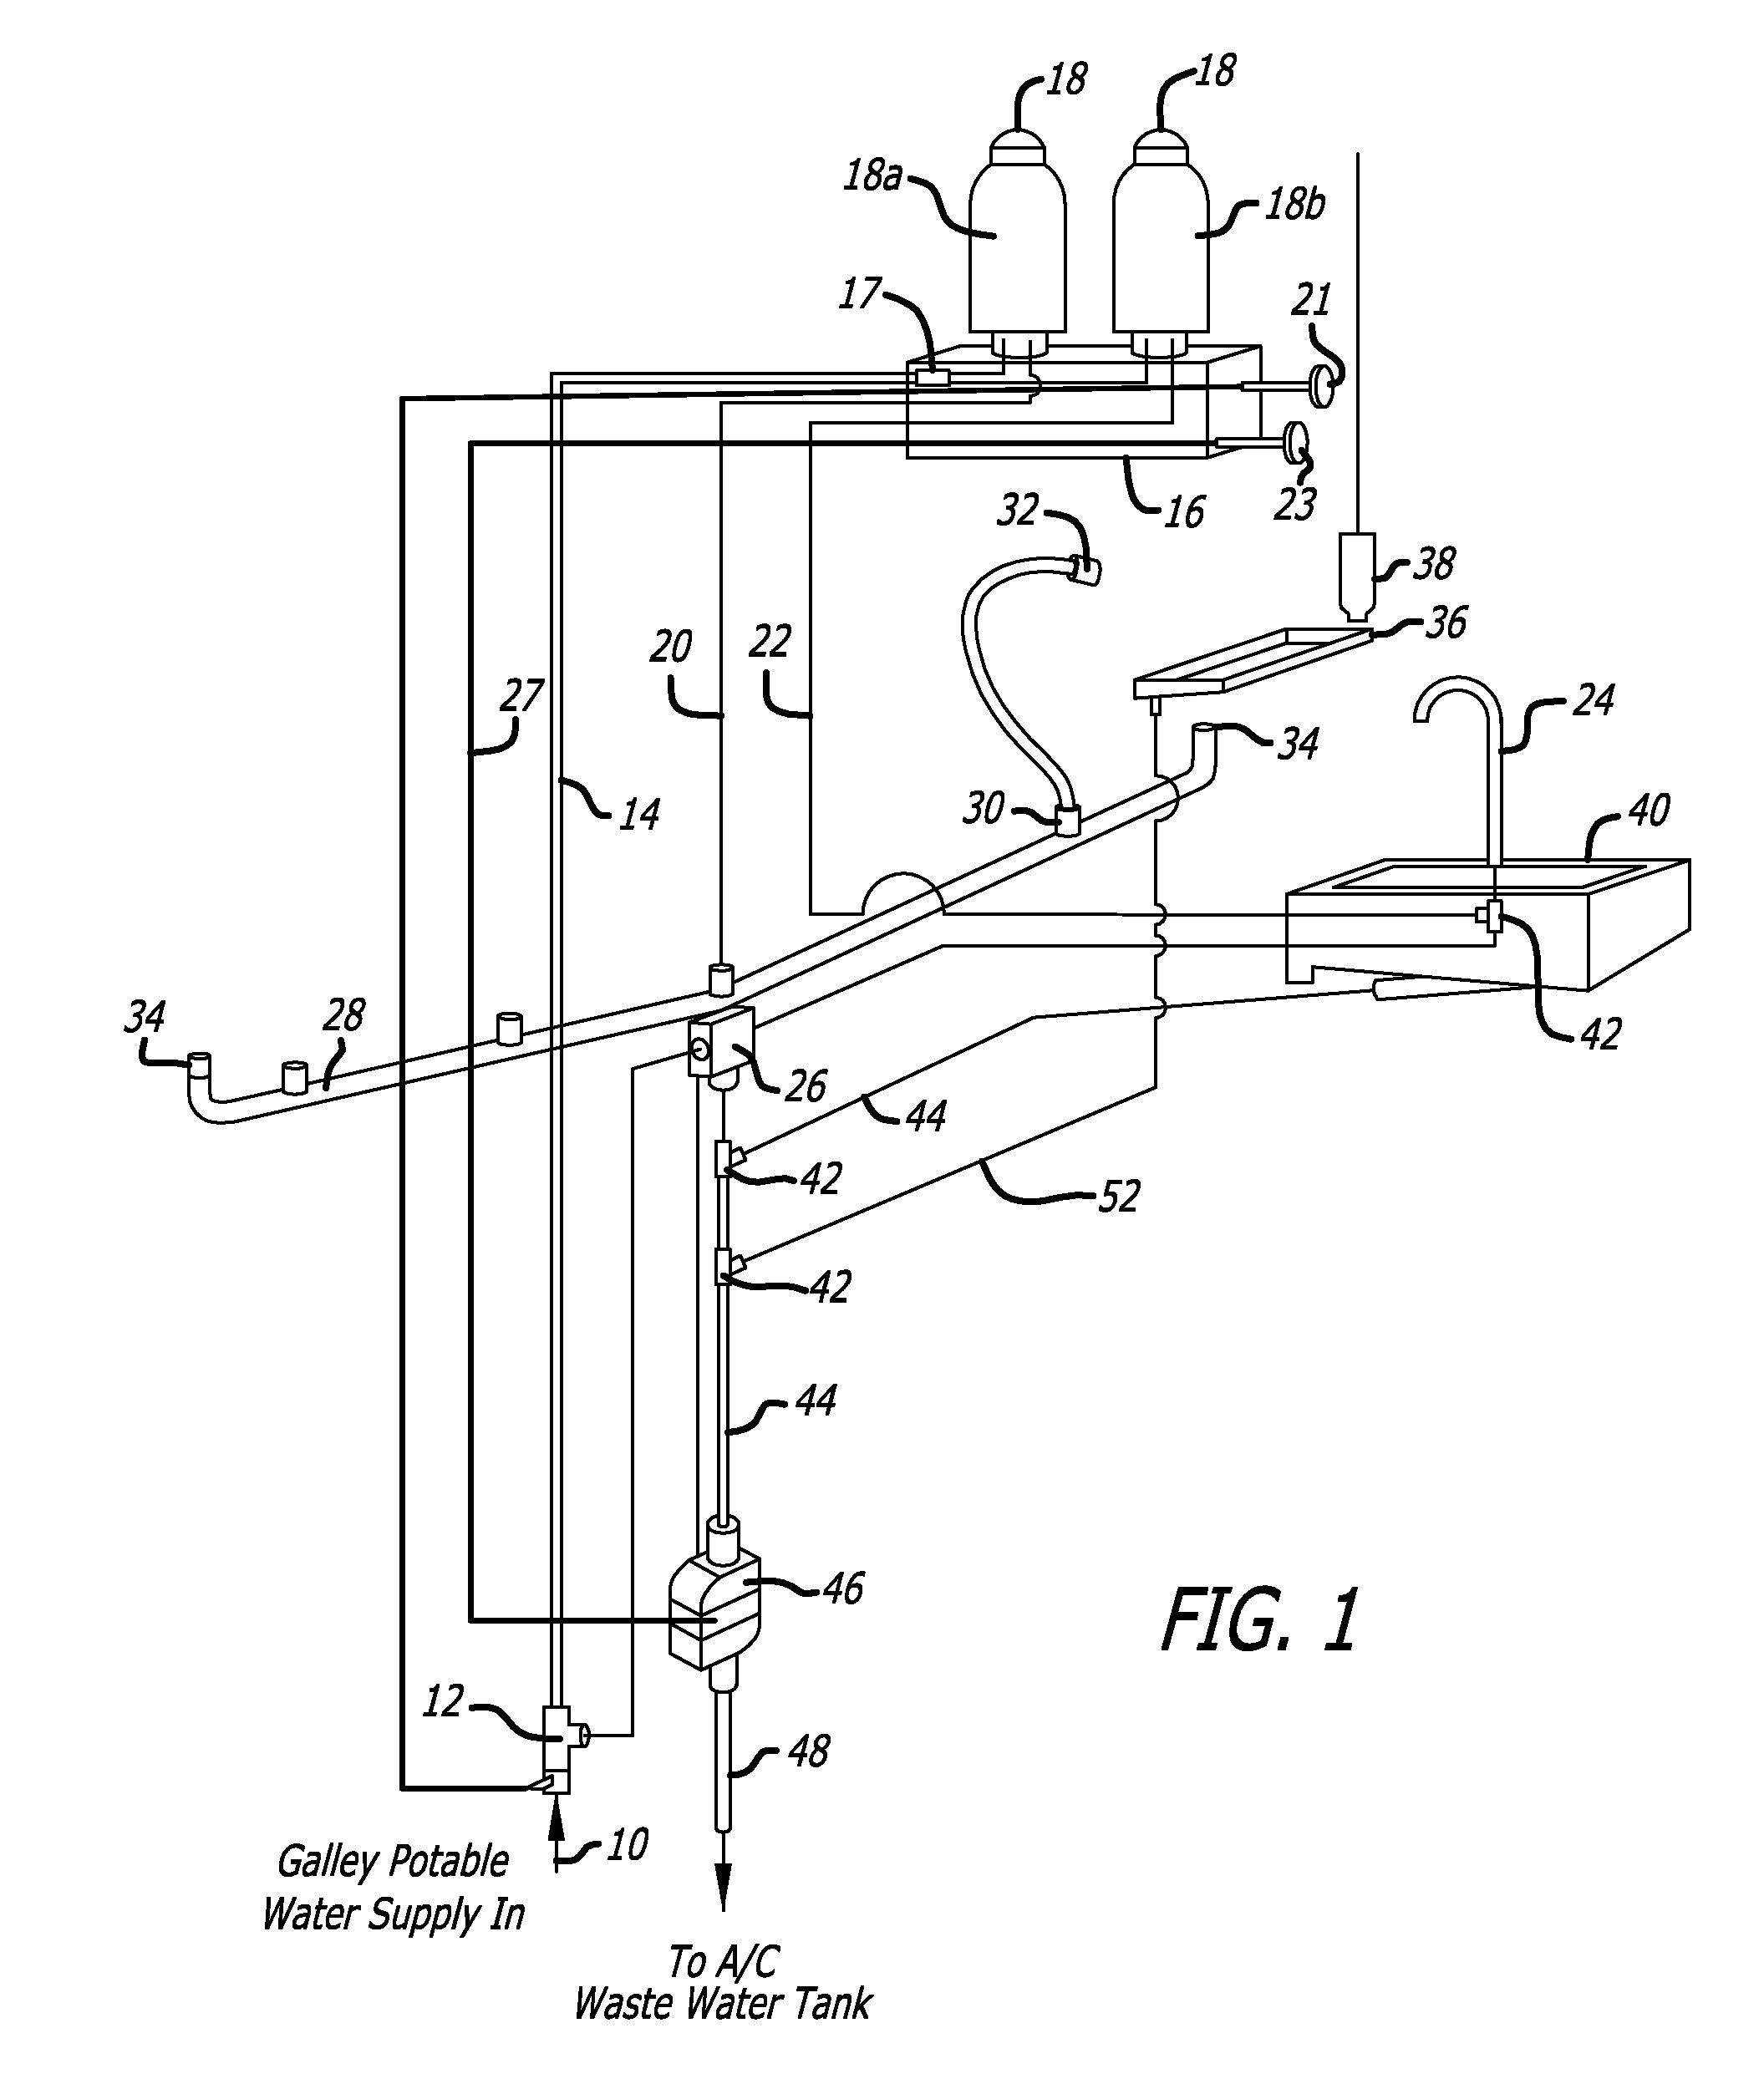 Compact air stop valve for aircraft galley plumbing system